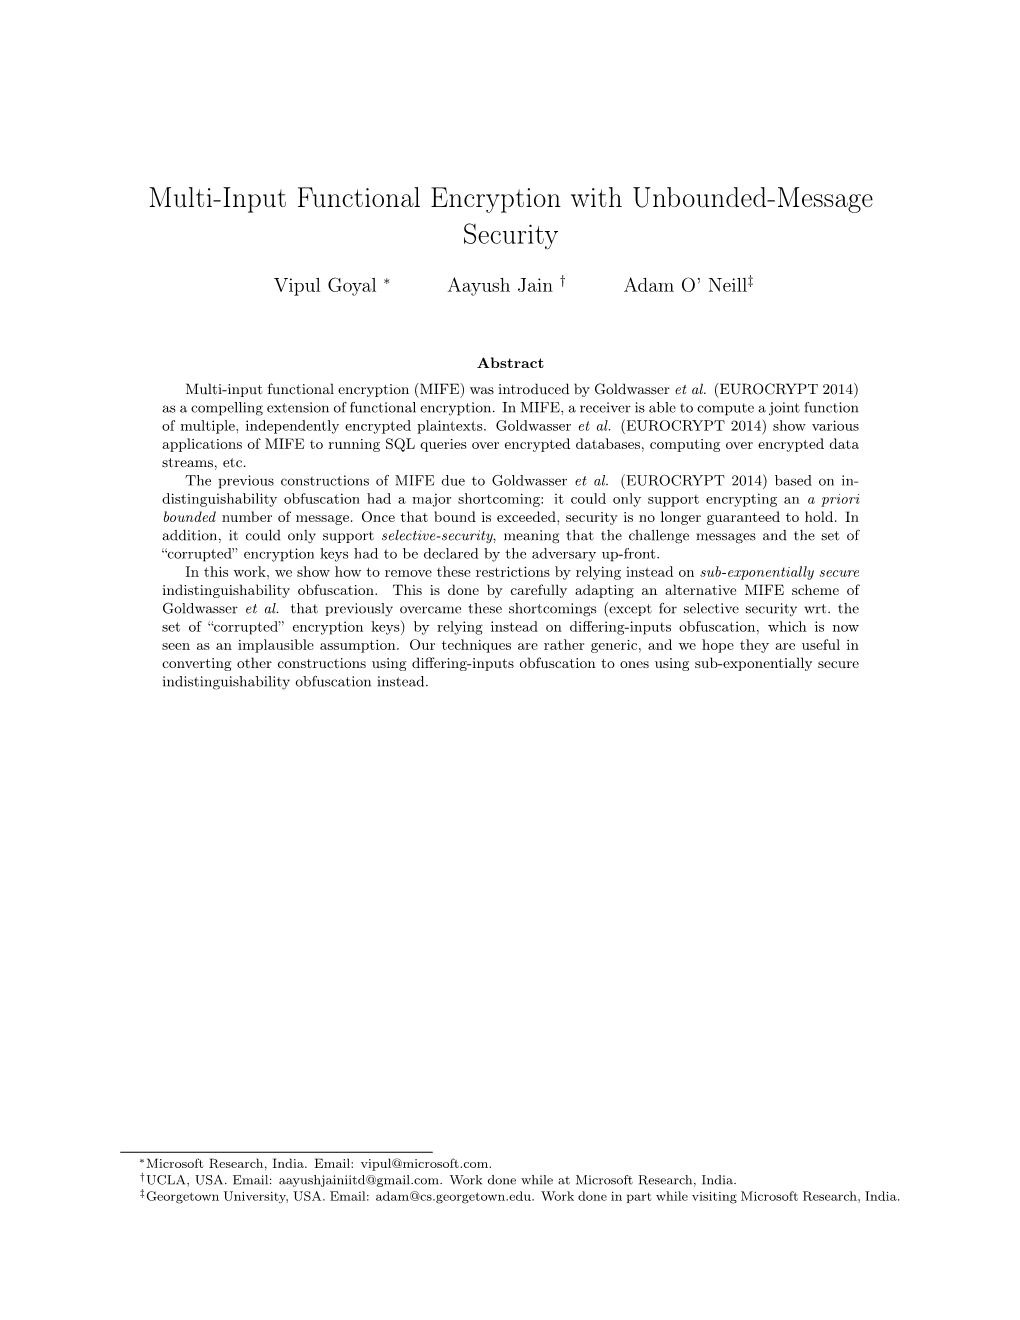 Multi-Input Functional Encryption with Unbounded-Message Security